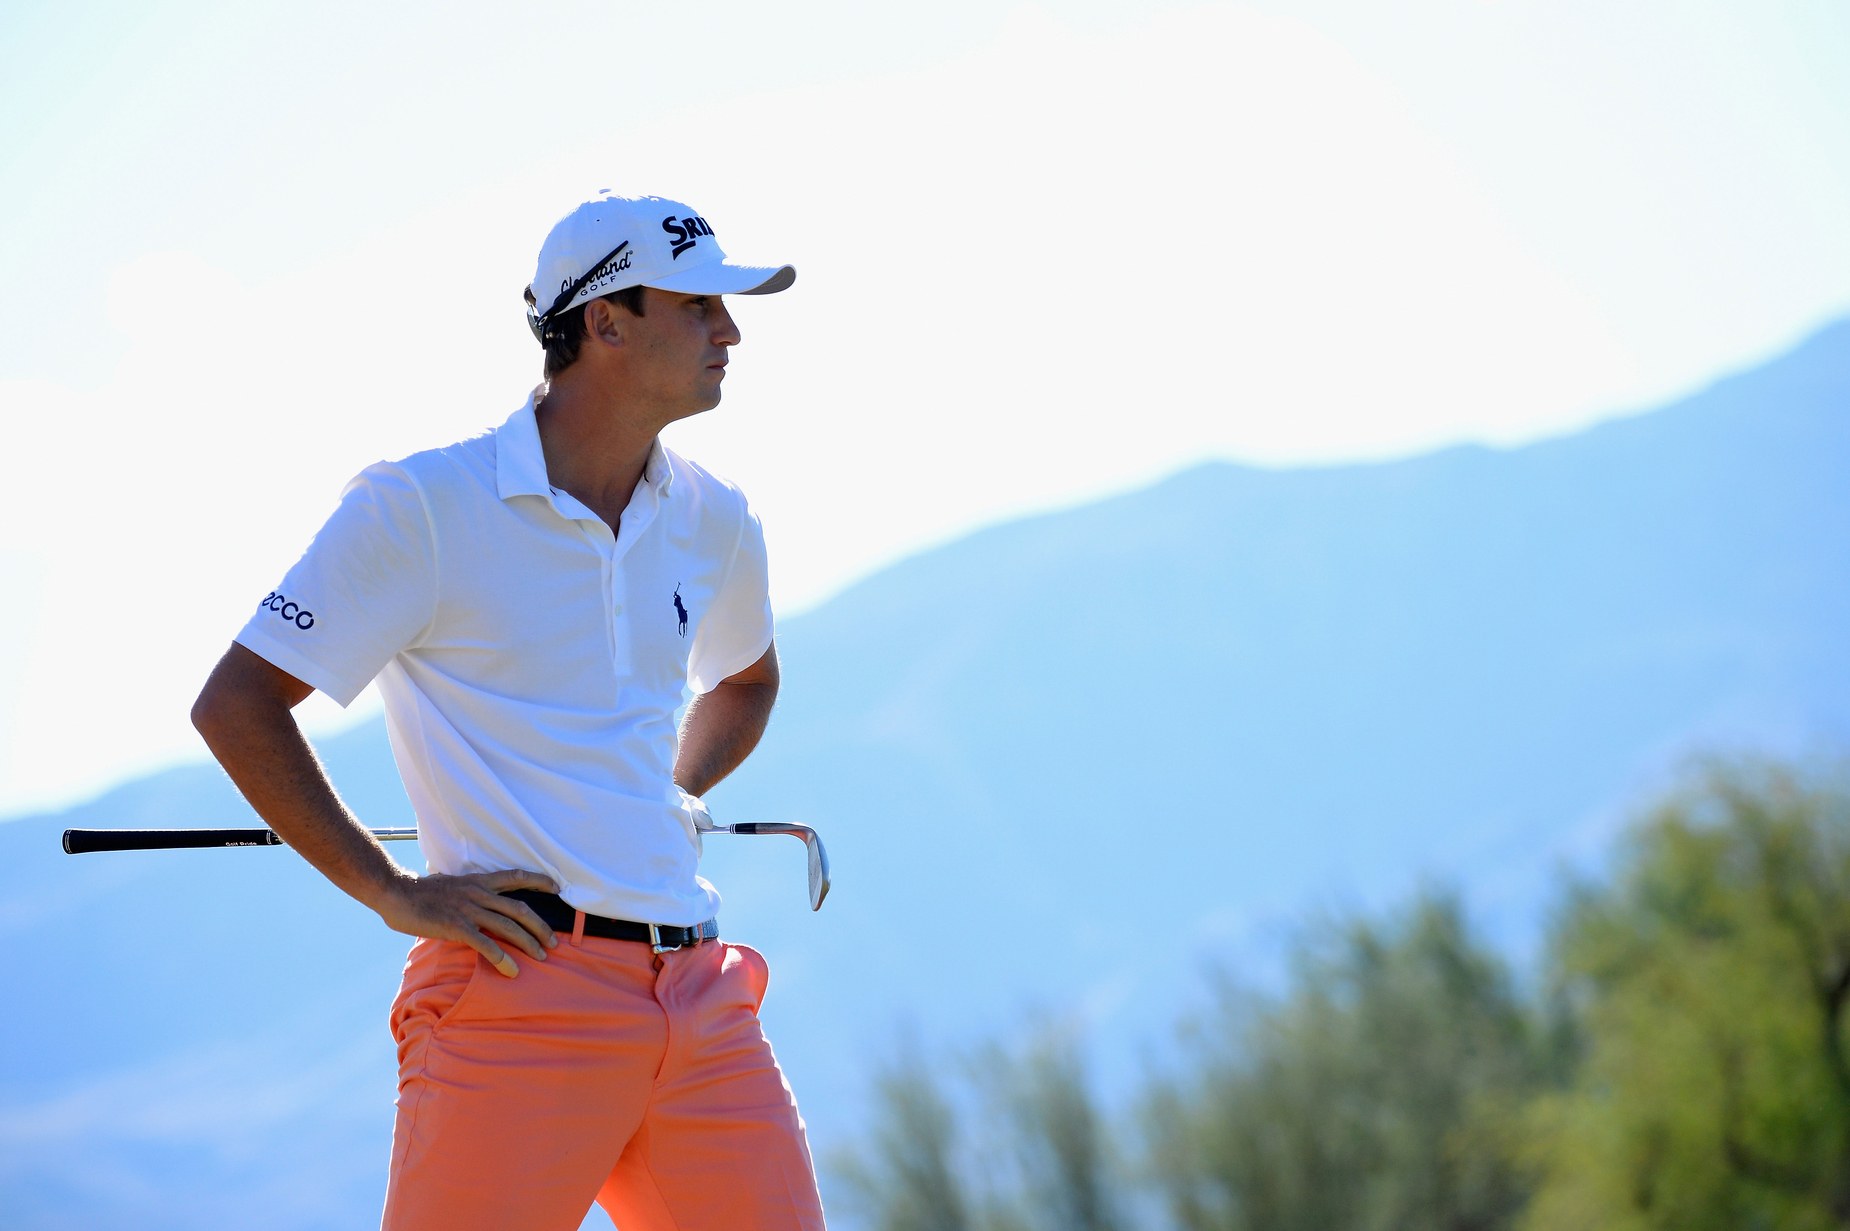 Smylie Kaufman, his oncepromising career on hold, speaks out about the